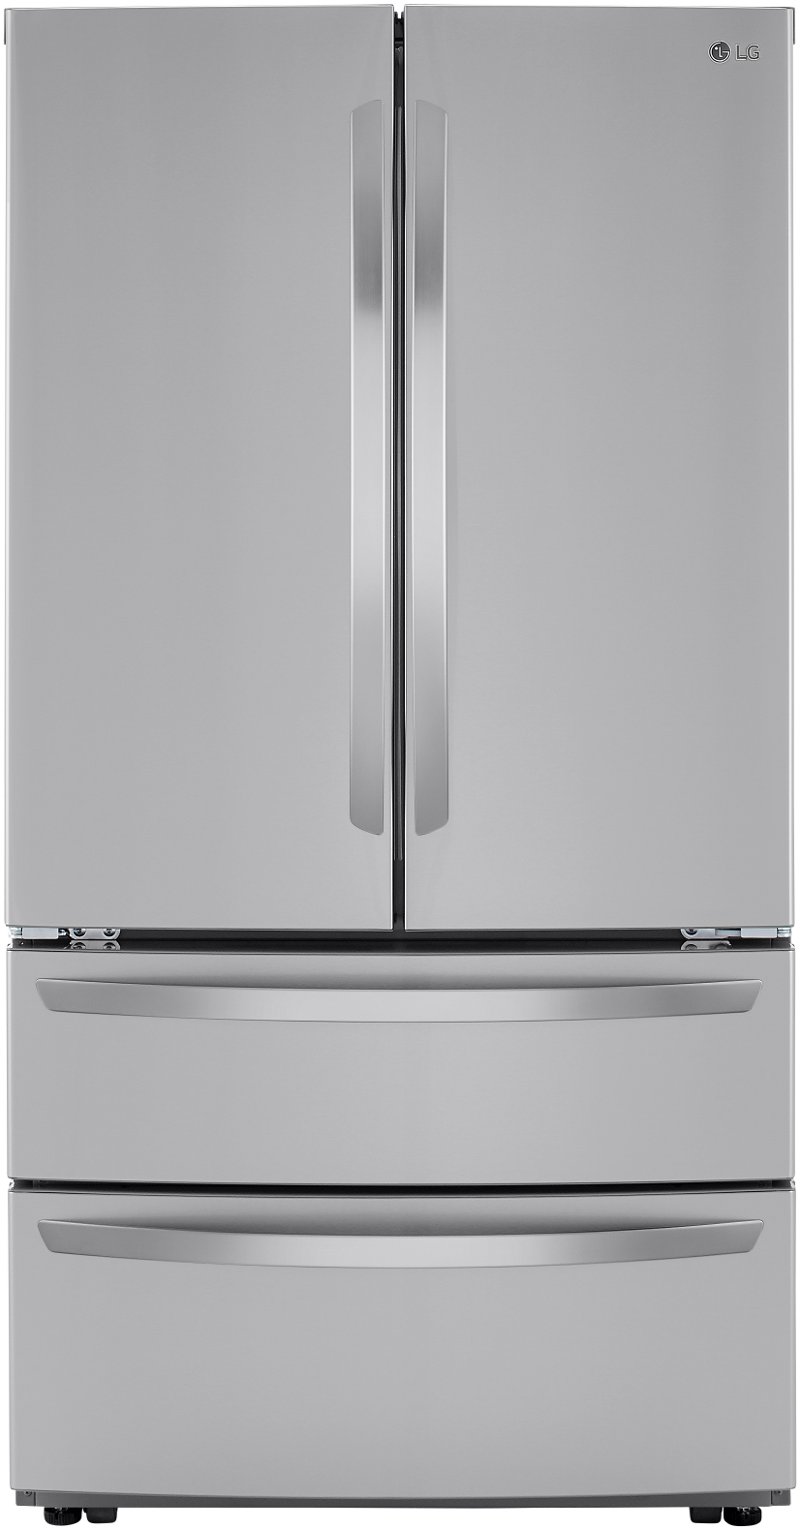 16++ Counter depth french door refrigerator meaning ideas